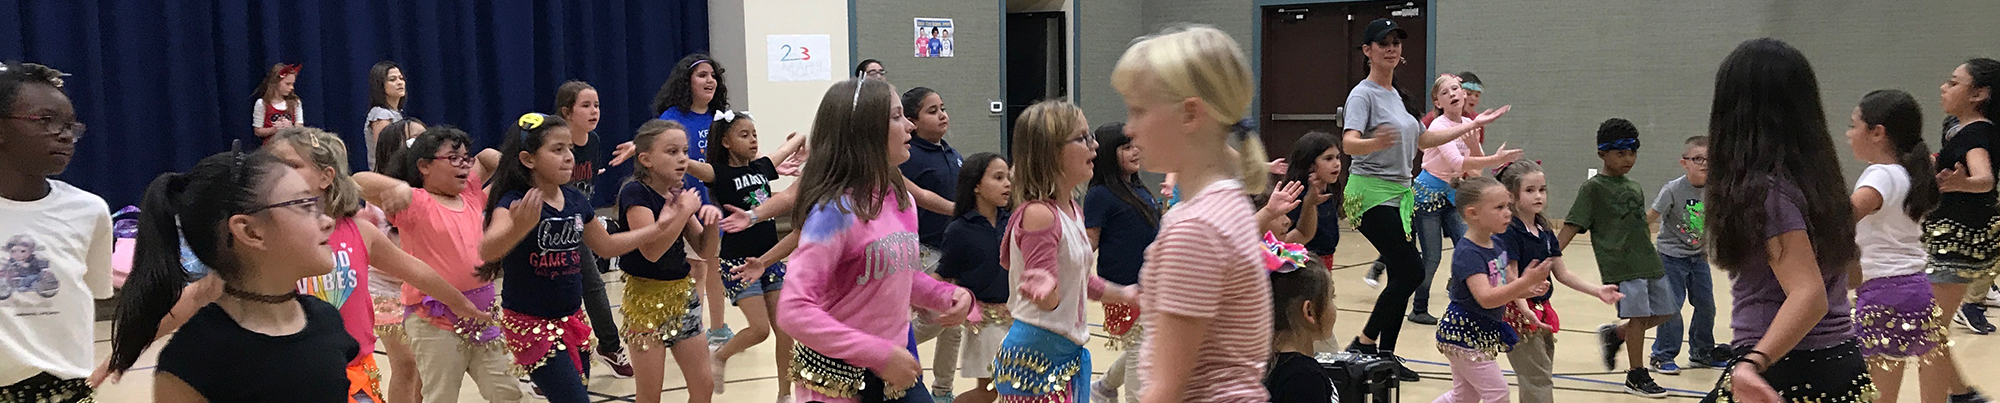 Many students dancing in a group